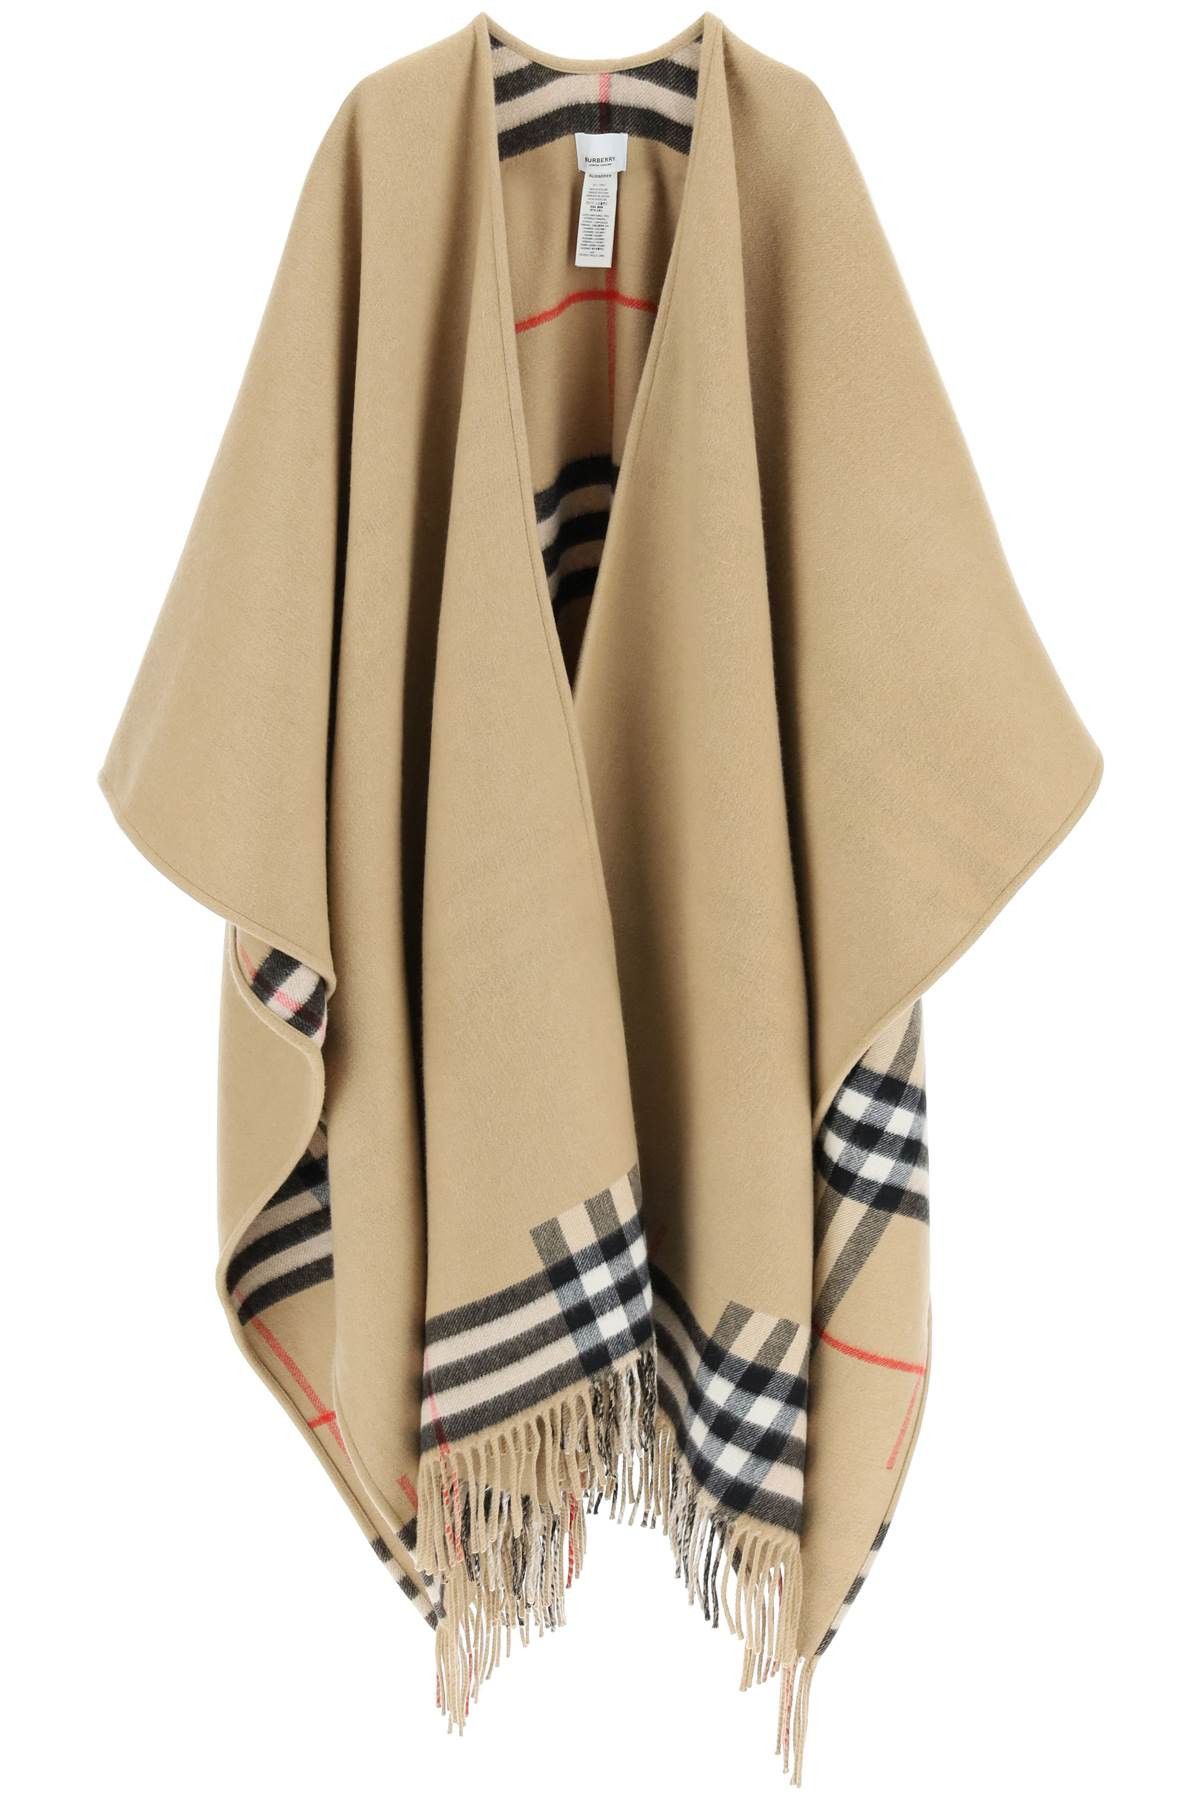 Burberry Burberry Wool Cashmere Cape | Grailed